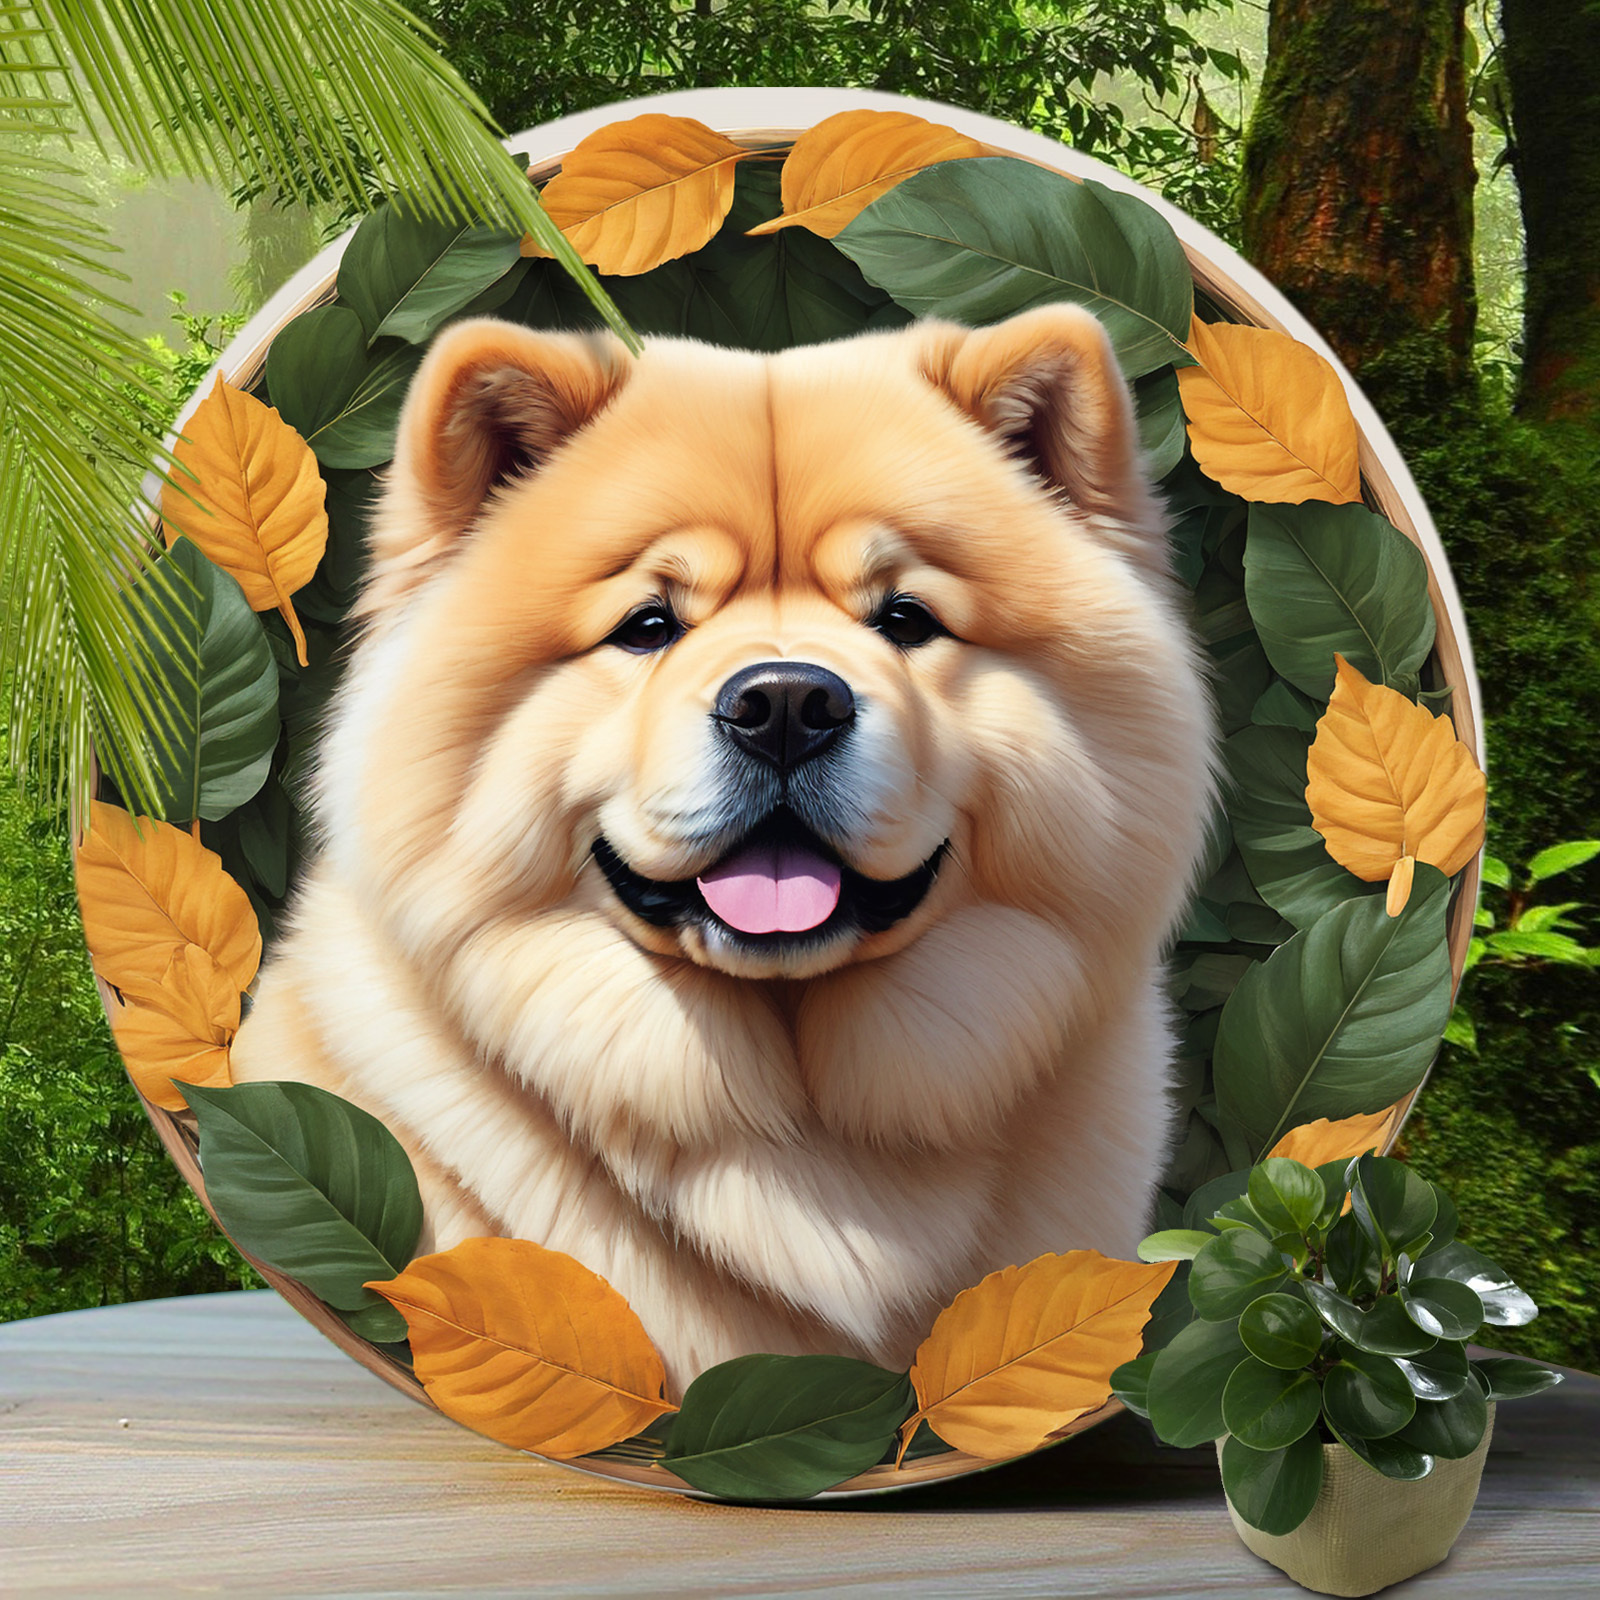 

1pc, Chow Chow Dog Sign - Cute Dog Aluminum Sign, Suitable For Home Room Cafe Bedroom Bar Living Room Garage Wall Decoration, Round Fashion Art Aesthetic, Holiday Gift 8x8 Inch (20x20cm)